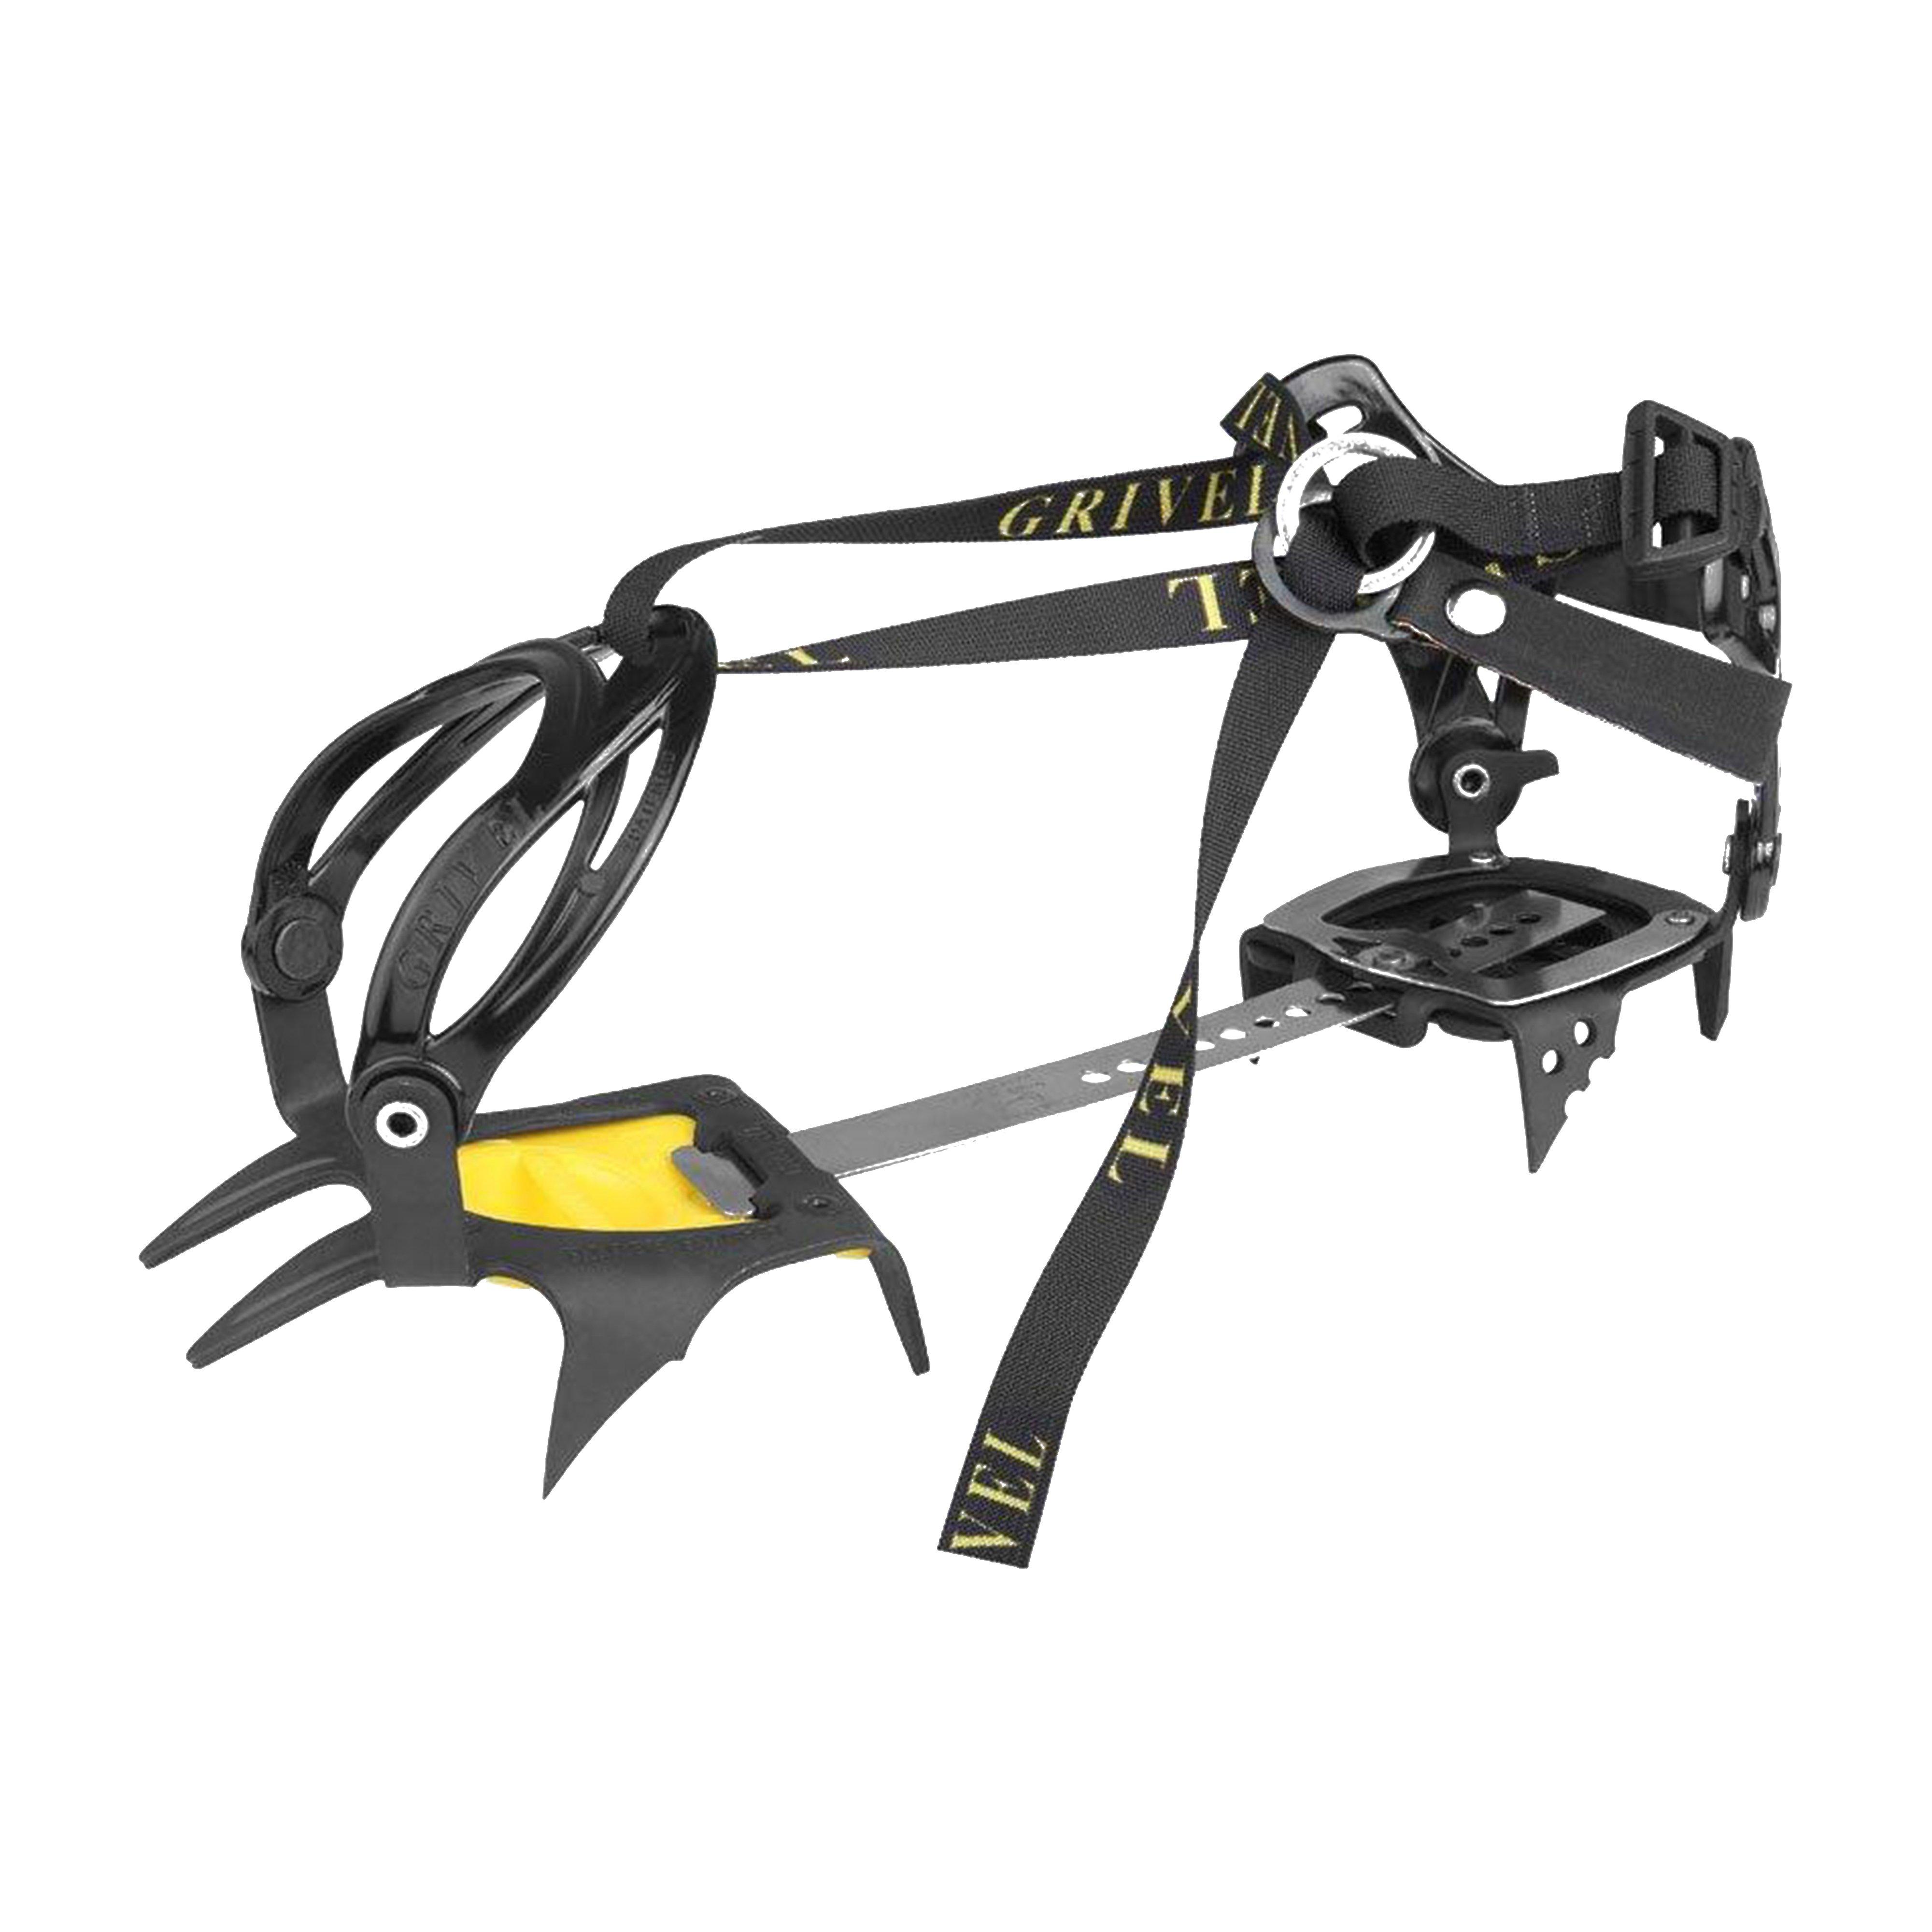 Grivel G1 New Classic Crampon Review